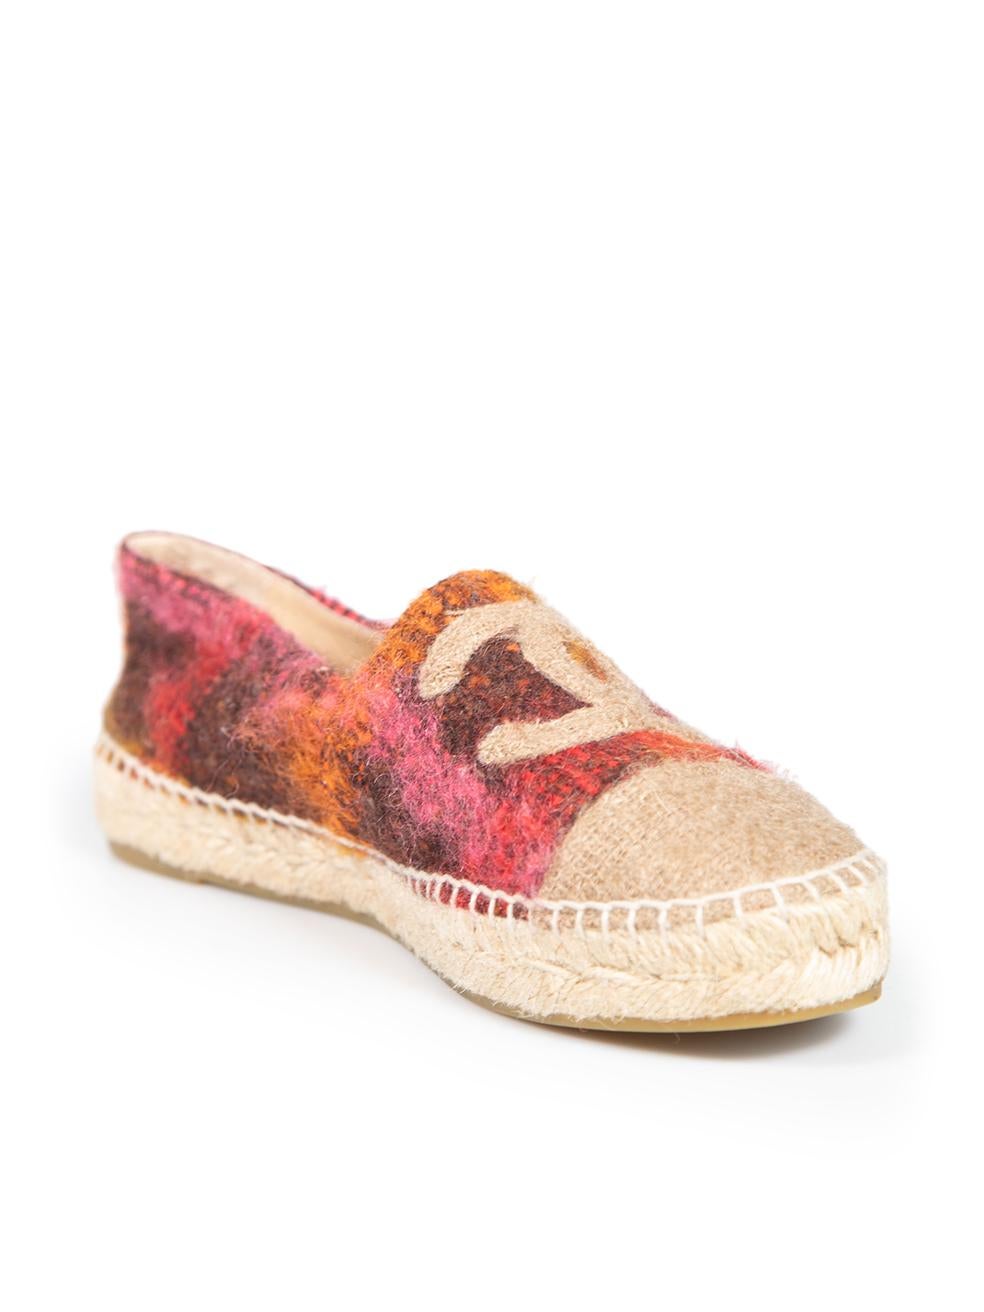 CONDITION is Very good. Hardly any visible wear to shoes is evident on this used Chanel designer resale item.
 
 
 
 Details
 
 
 Multicolour- brown, pink, orange
 
 Cloth
 
 Espadrilles
 
 Checkered pattern
 
 Flat
 
 Round toe
 
 Brown cap toe
 
